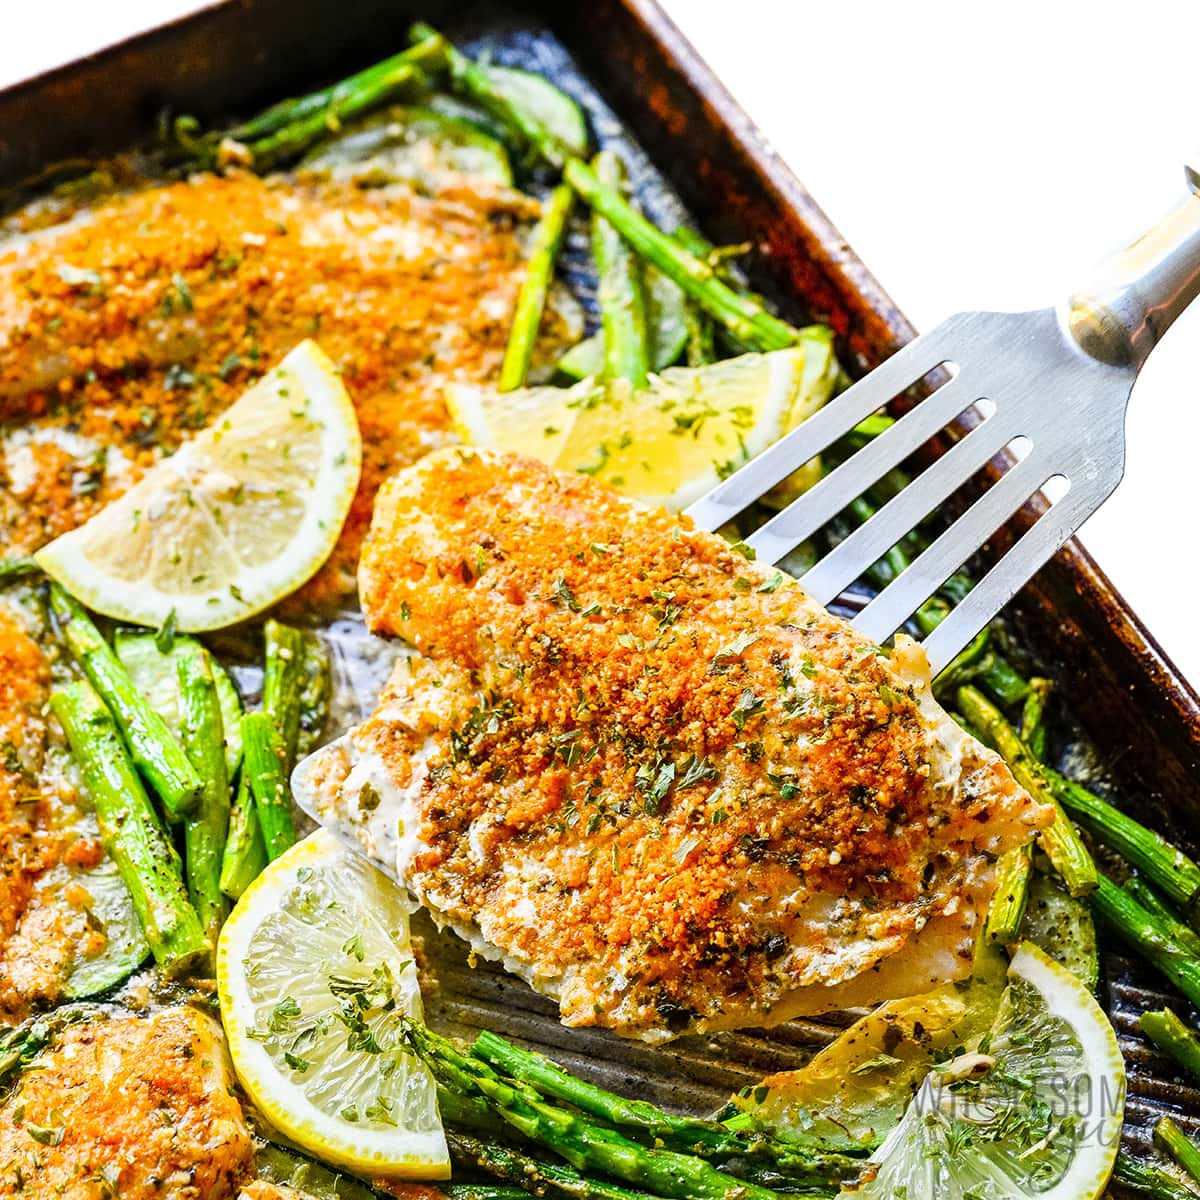 Parmesan crusted tilapia with spatula.